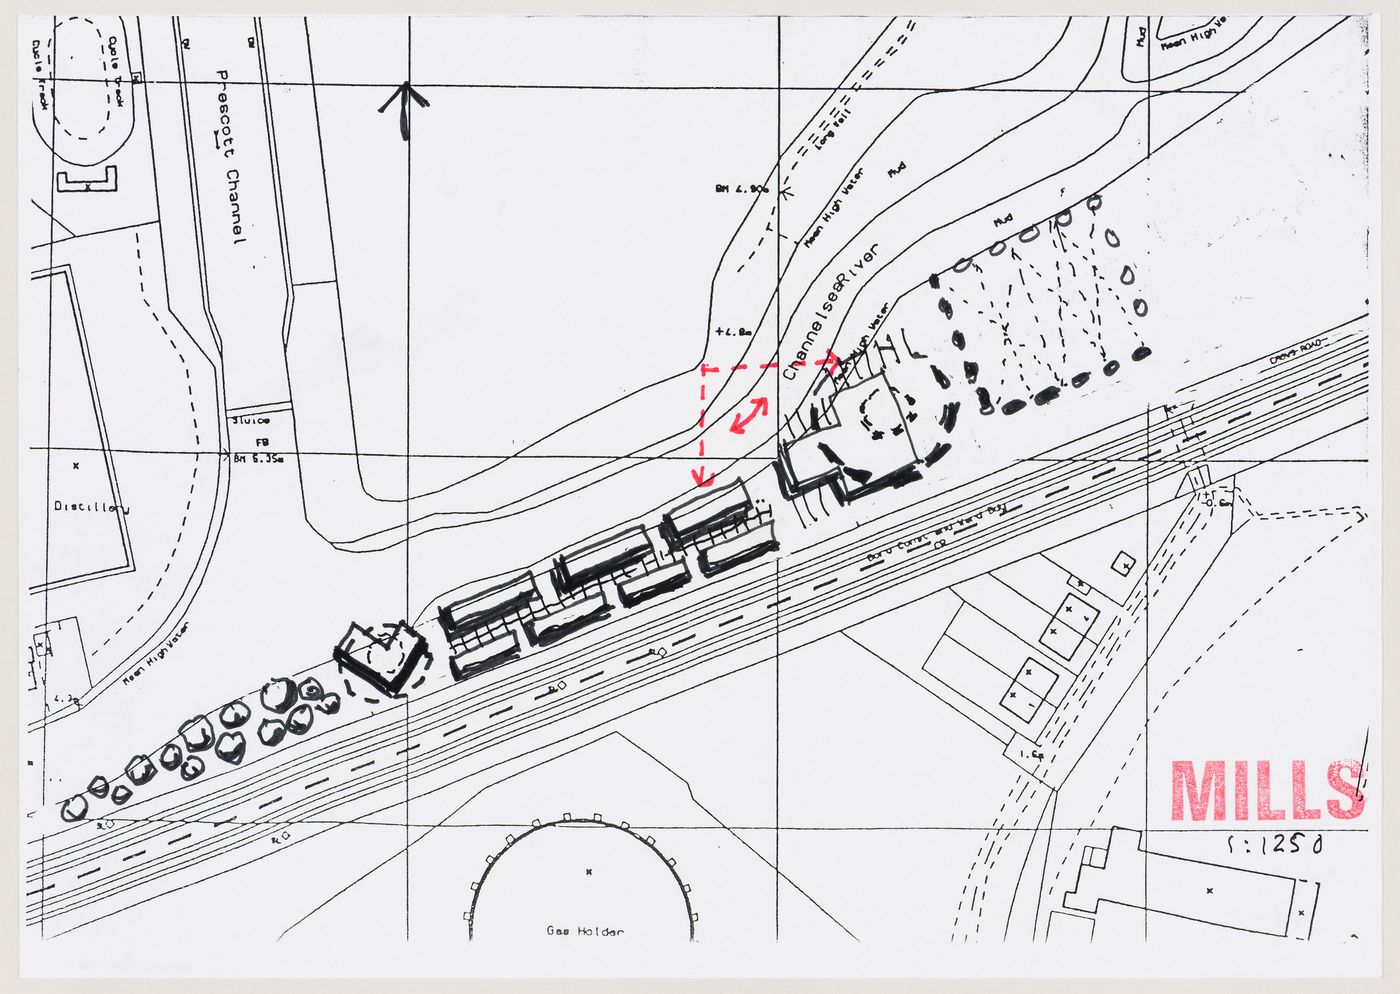 Mills: plan for the site on the bank of the Chanelsea River